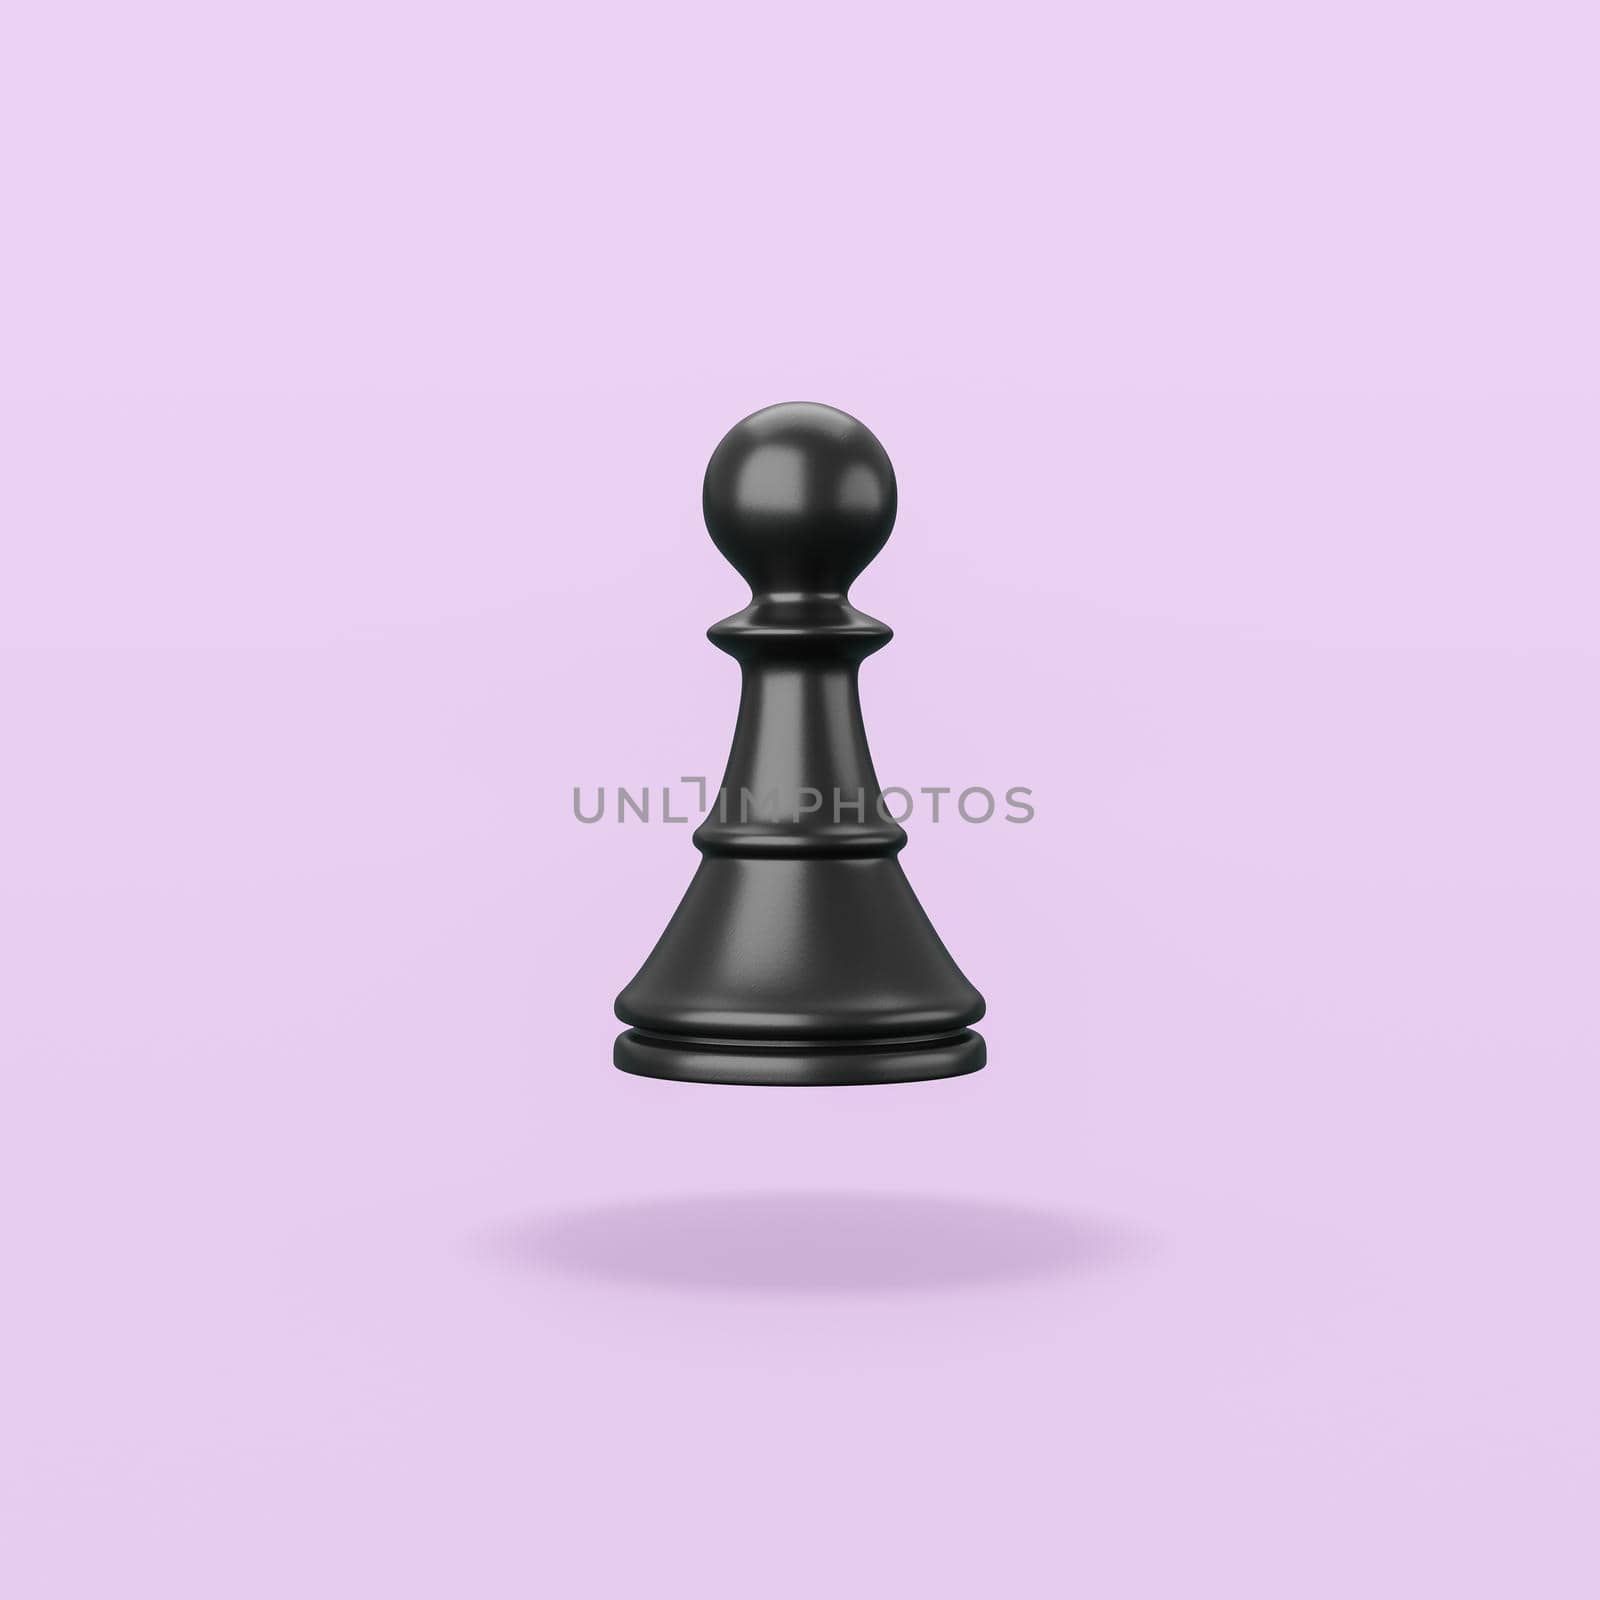 One Black Wooden Chessman Isolated on Flat Purple Background with Shadow 3D Illustration